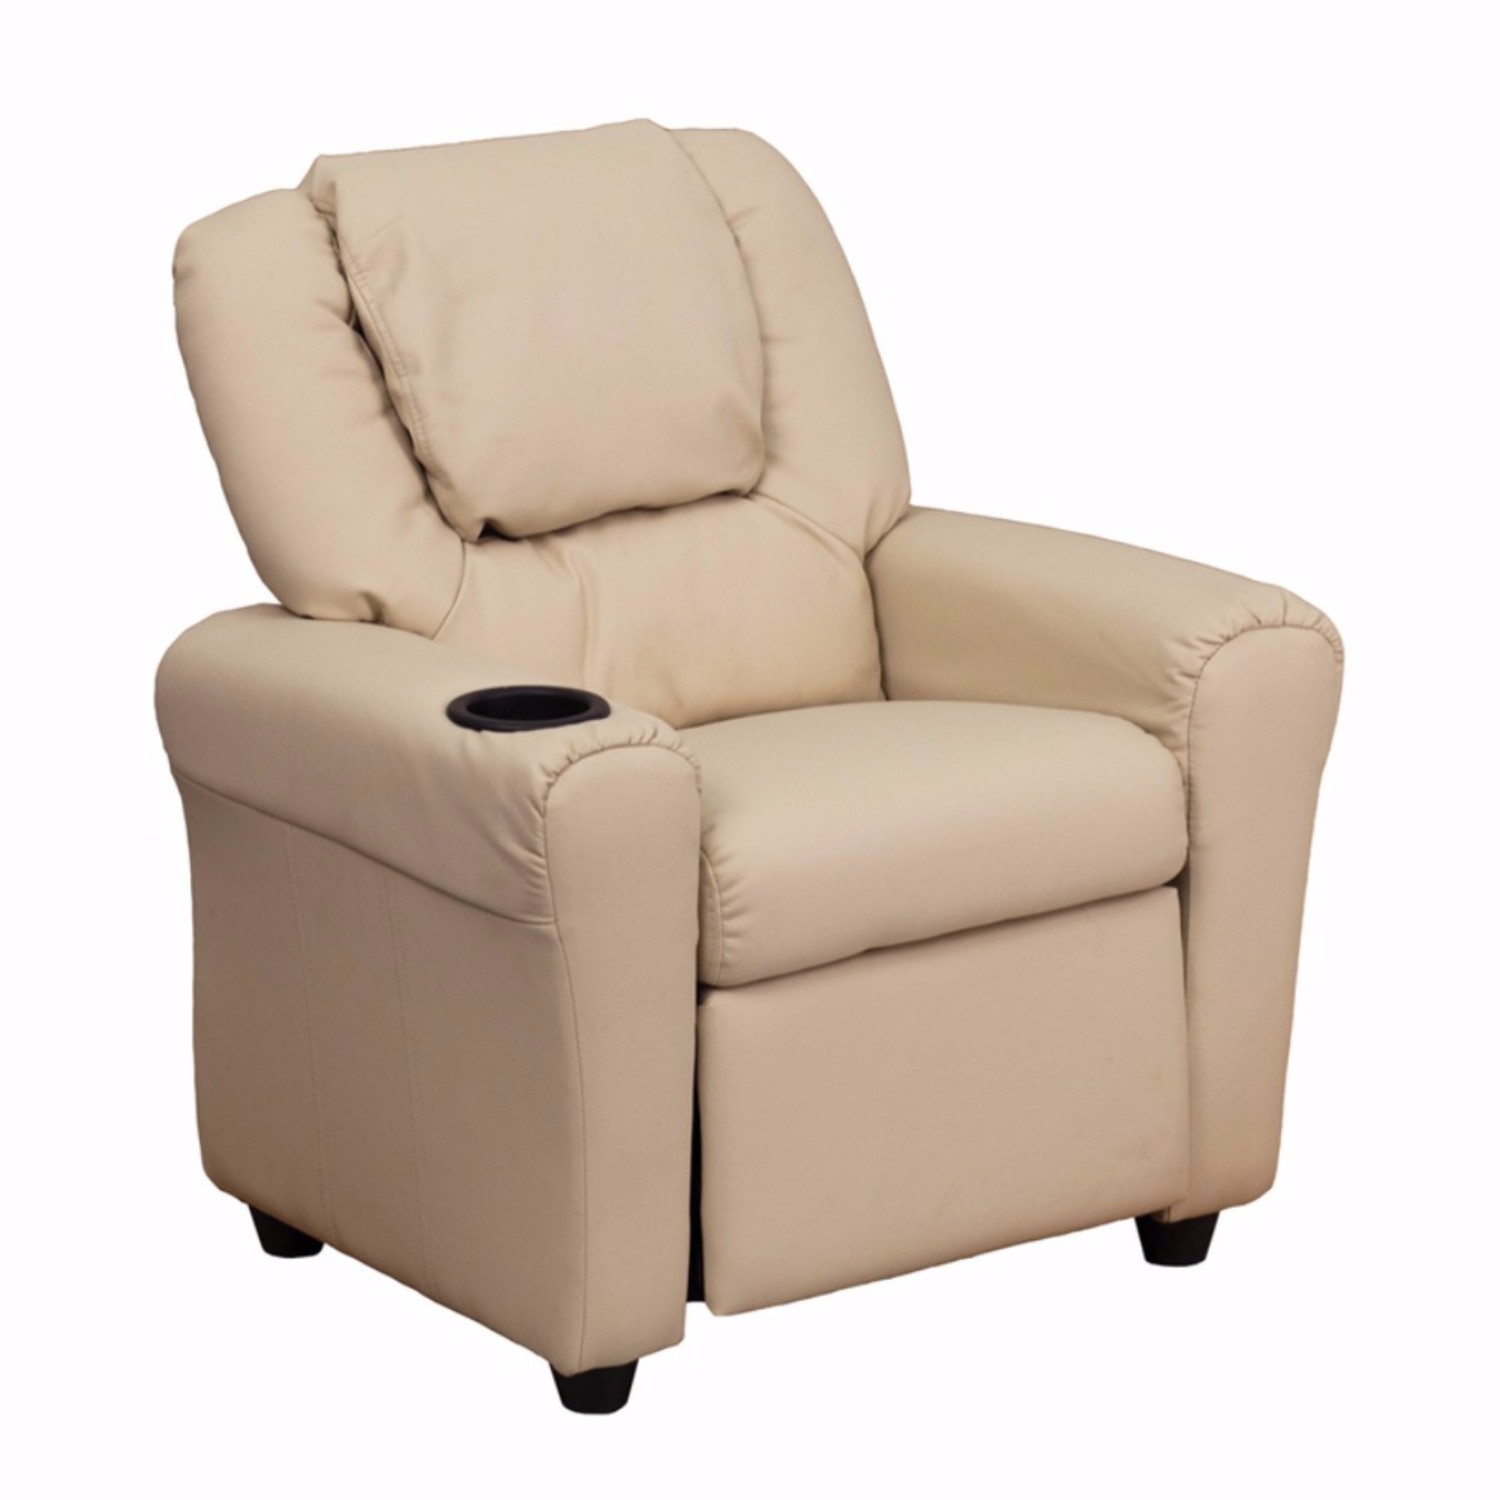 Contemporary Beige Vinyl Kids Recliner with Cup Holder and Headrest